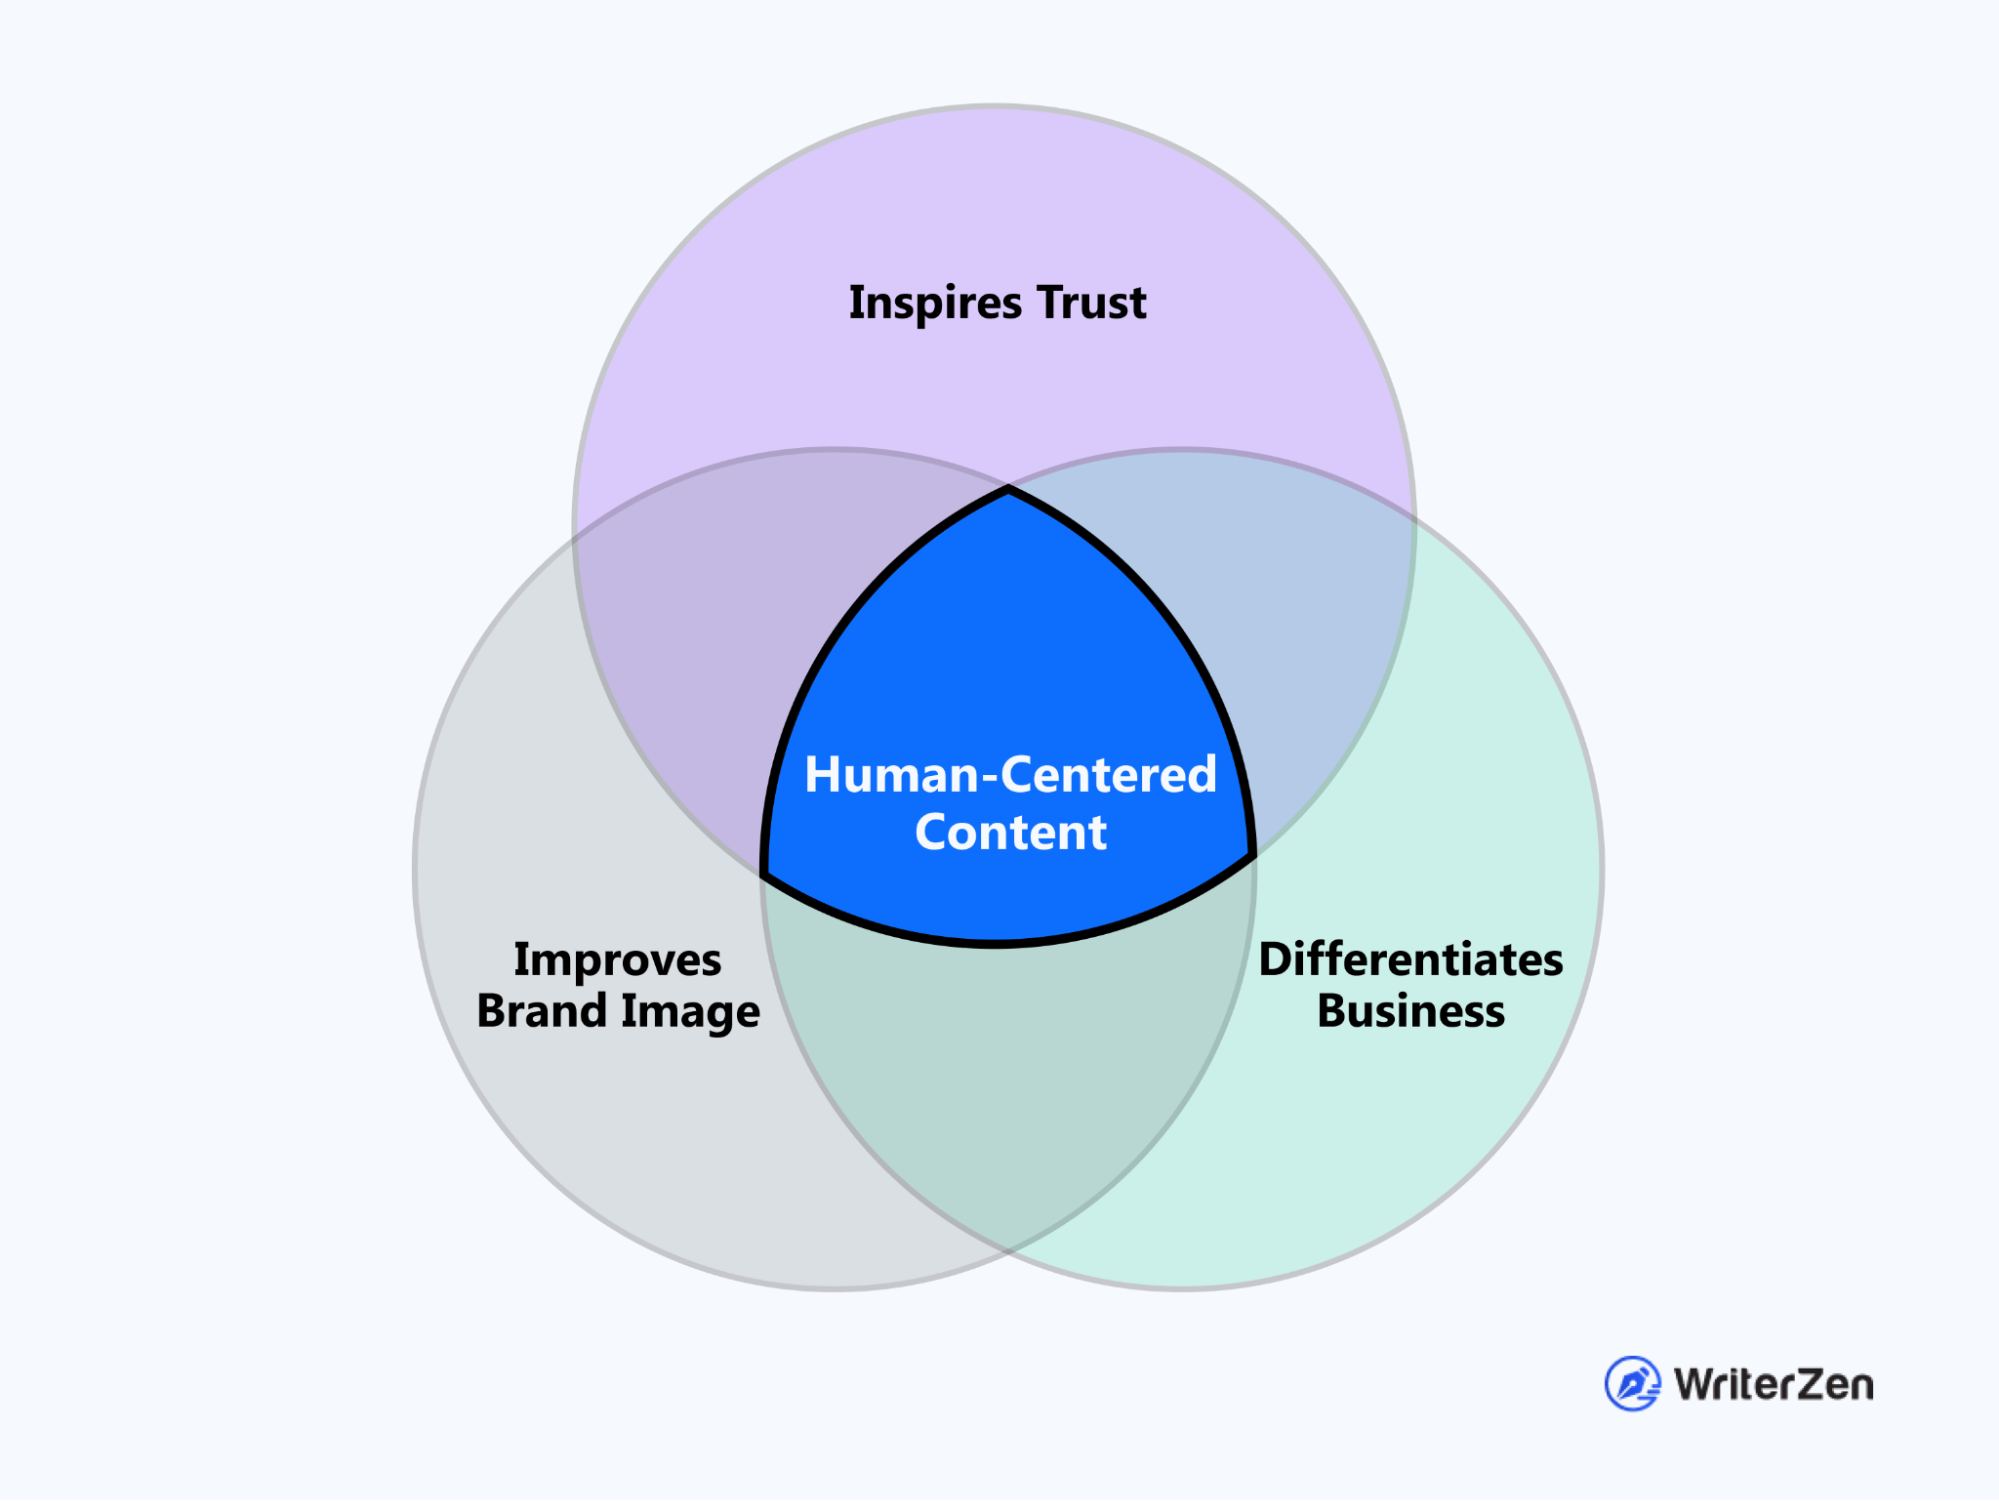 Why Human-Centered Content is Important